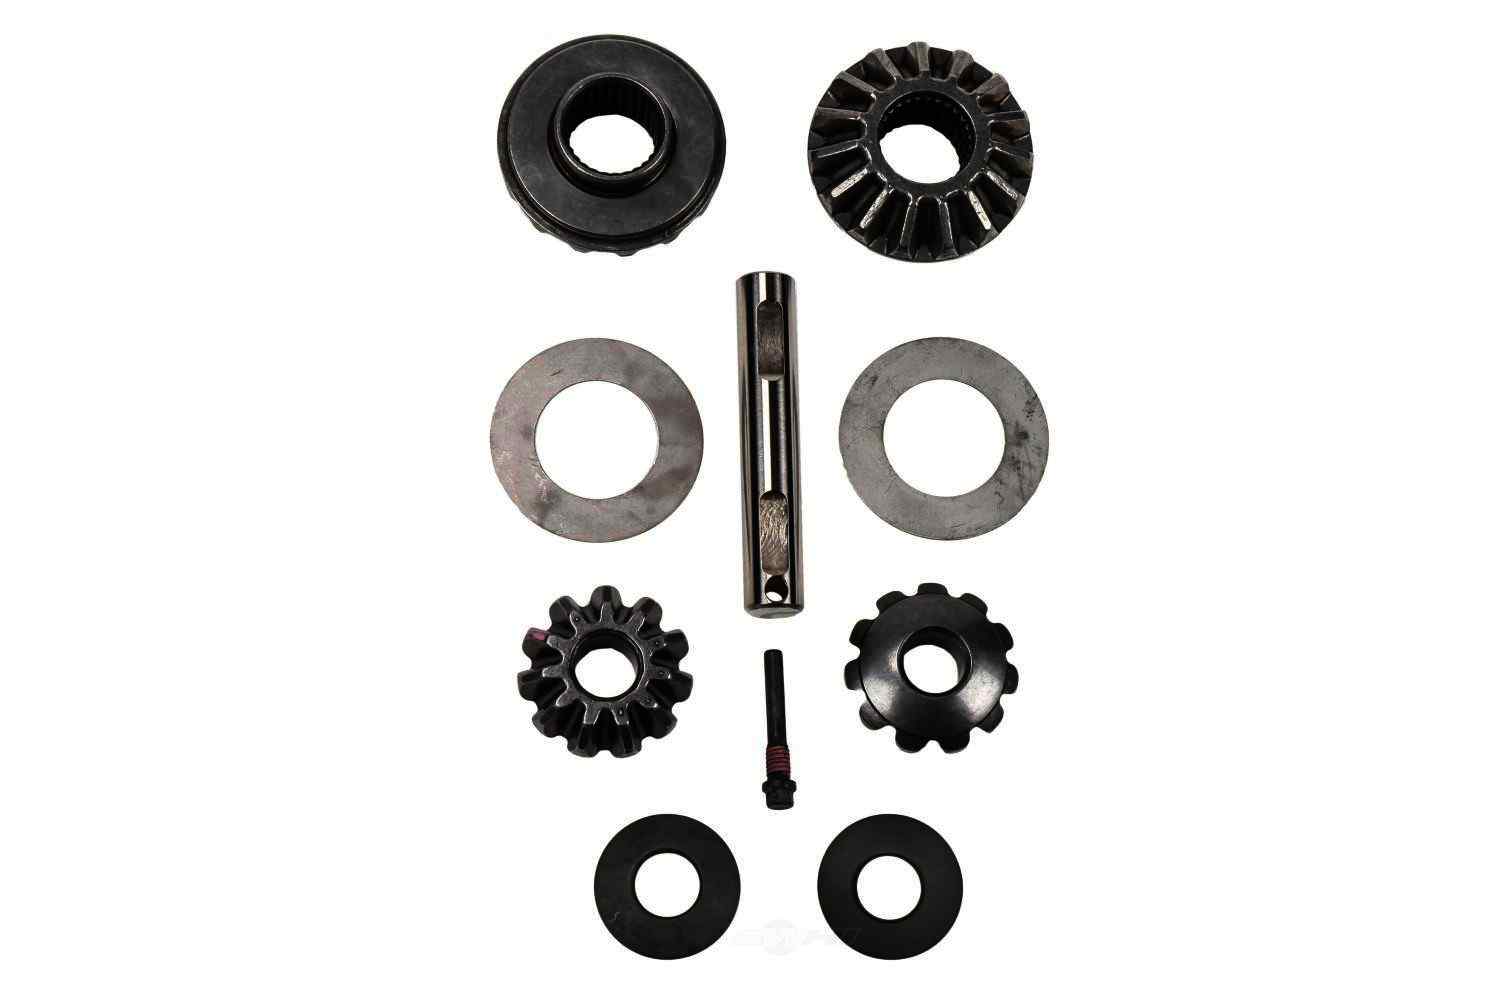 GM GENUINE PARTS - Differential Carrier Gear Kit (Front Axle) - GMP 19179926